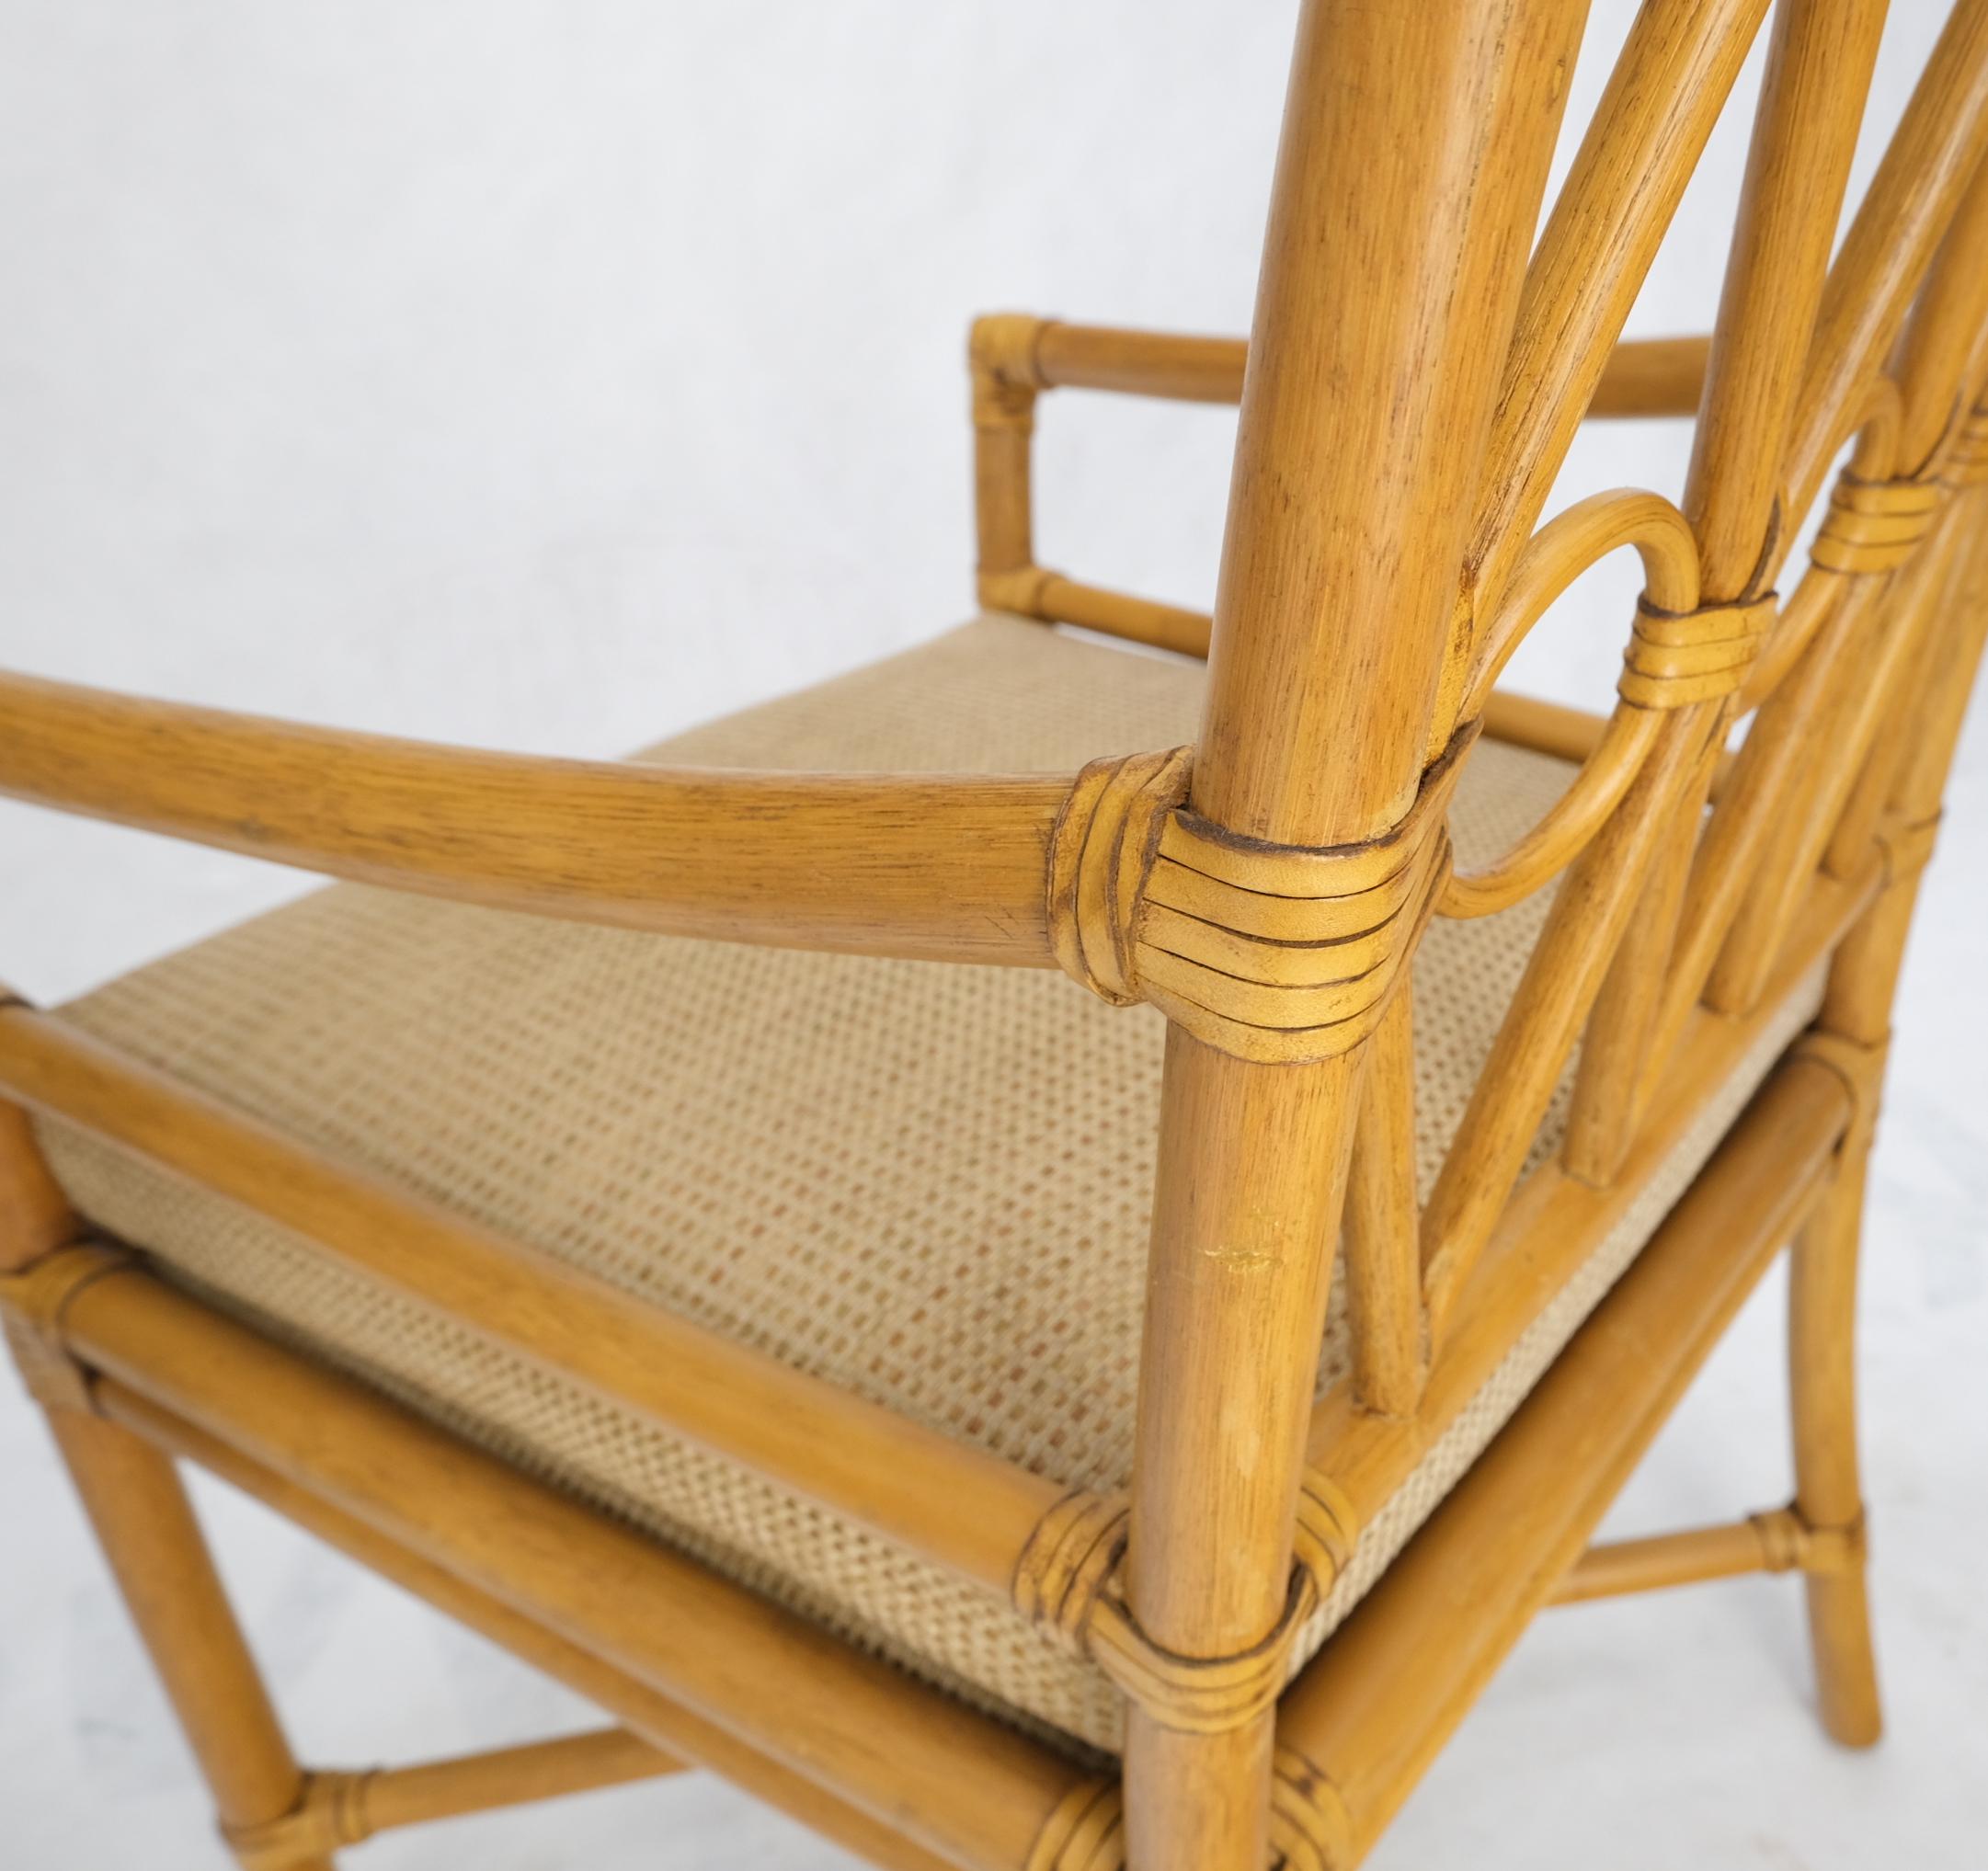 Pair Ficks Reed blonde rattan leather straps design armchairs side chairs, 1970's.